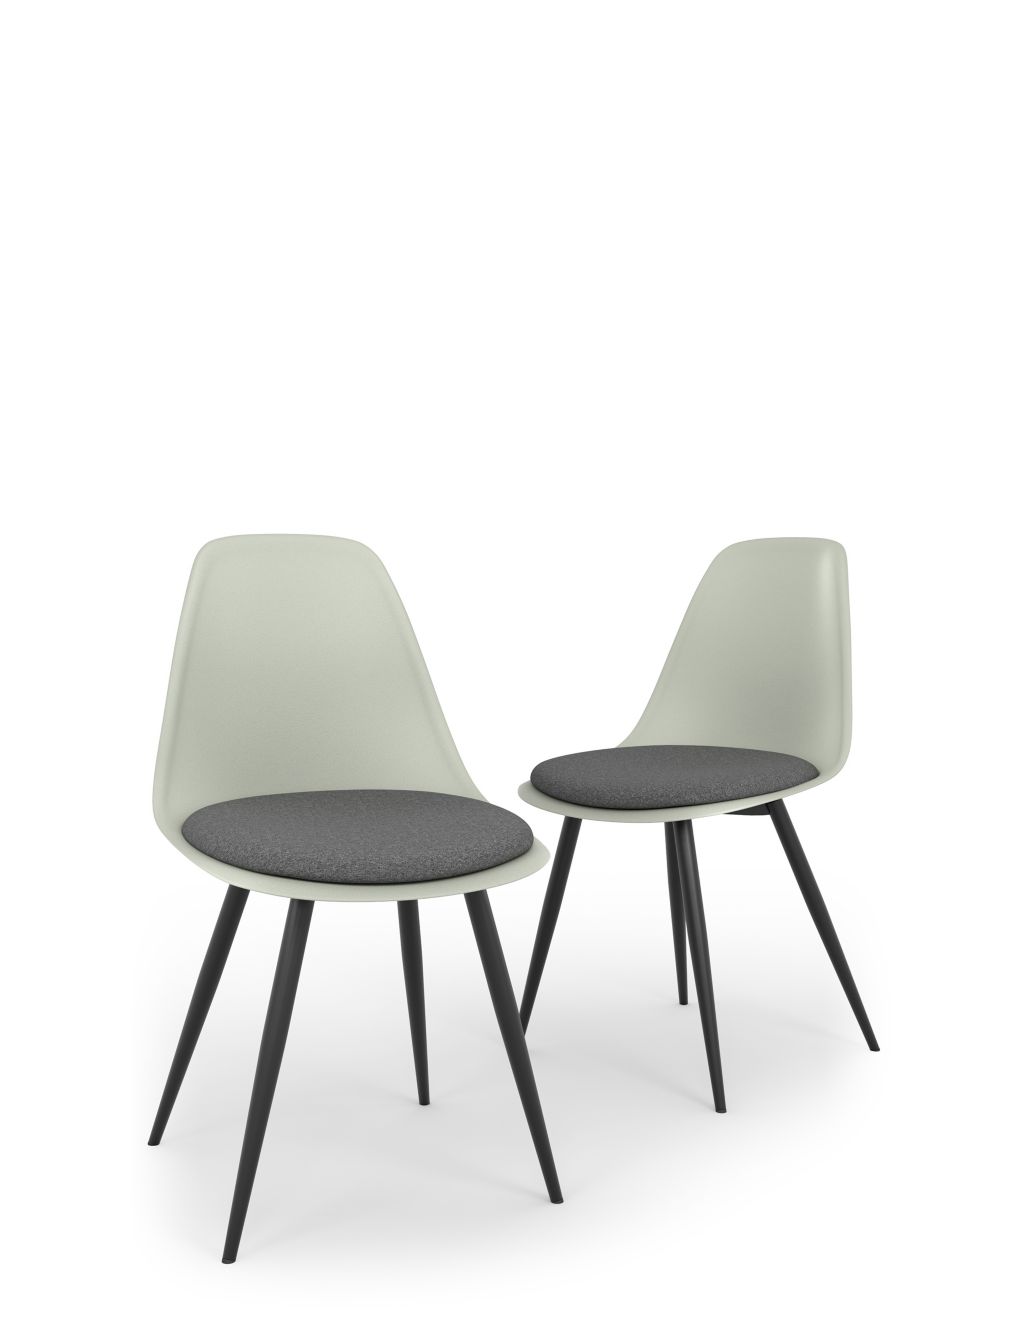 Set of 2 Arnie Dining Chairs